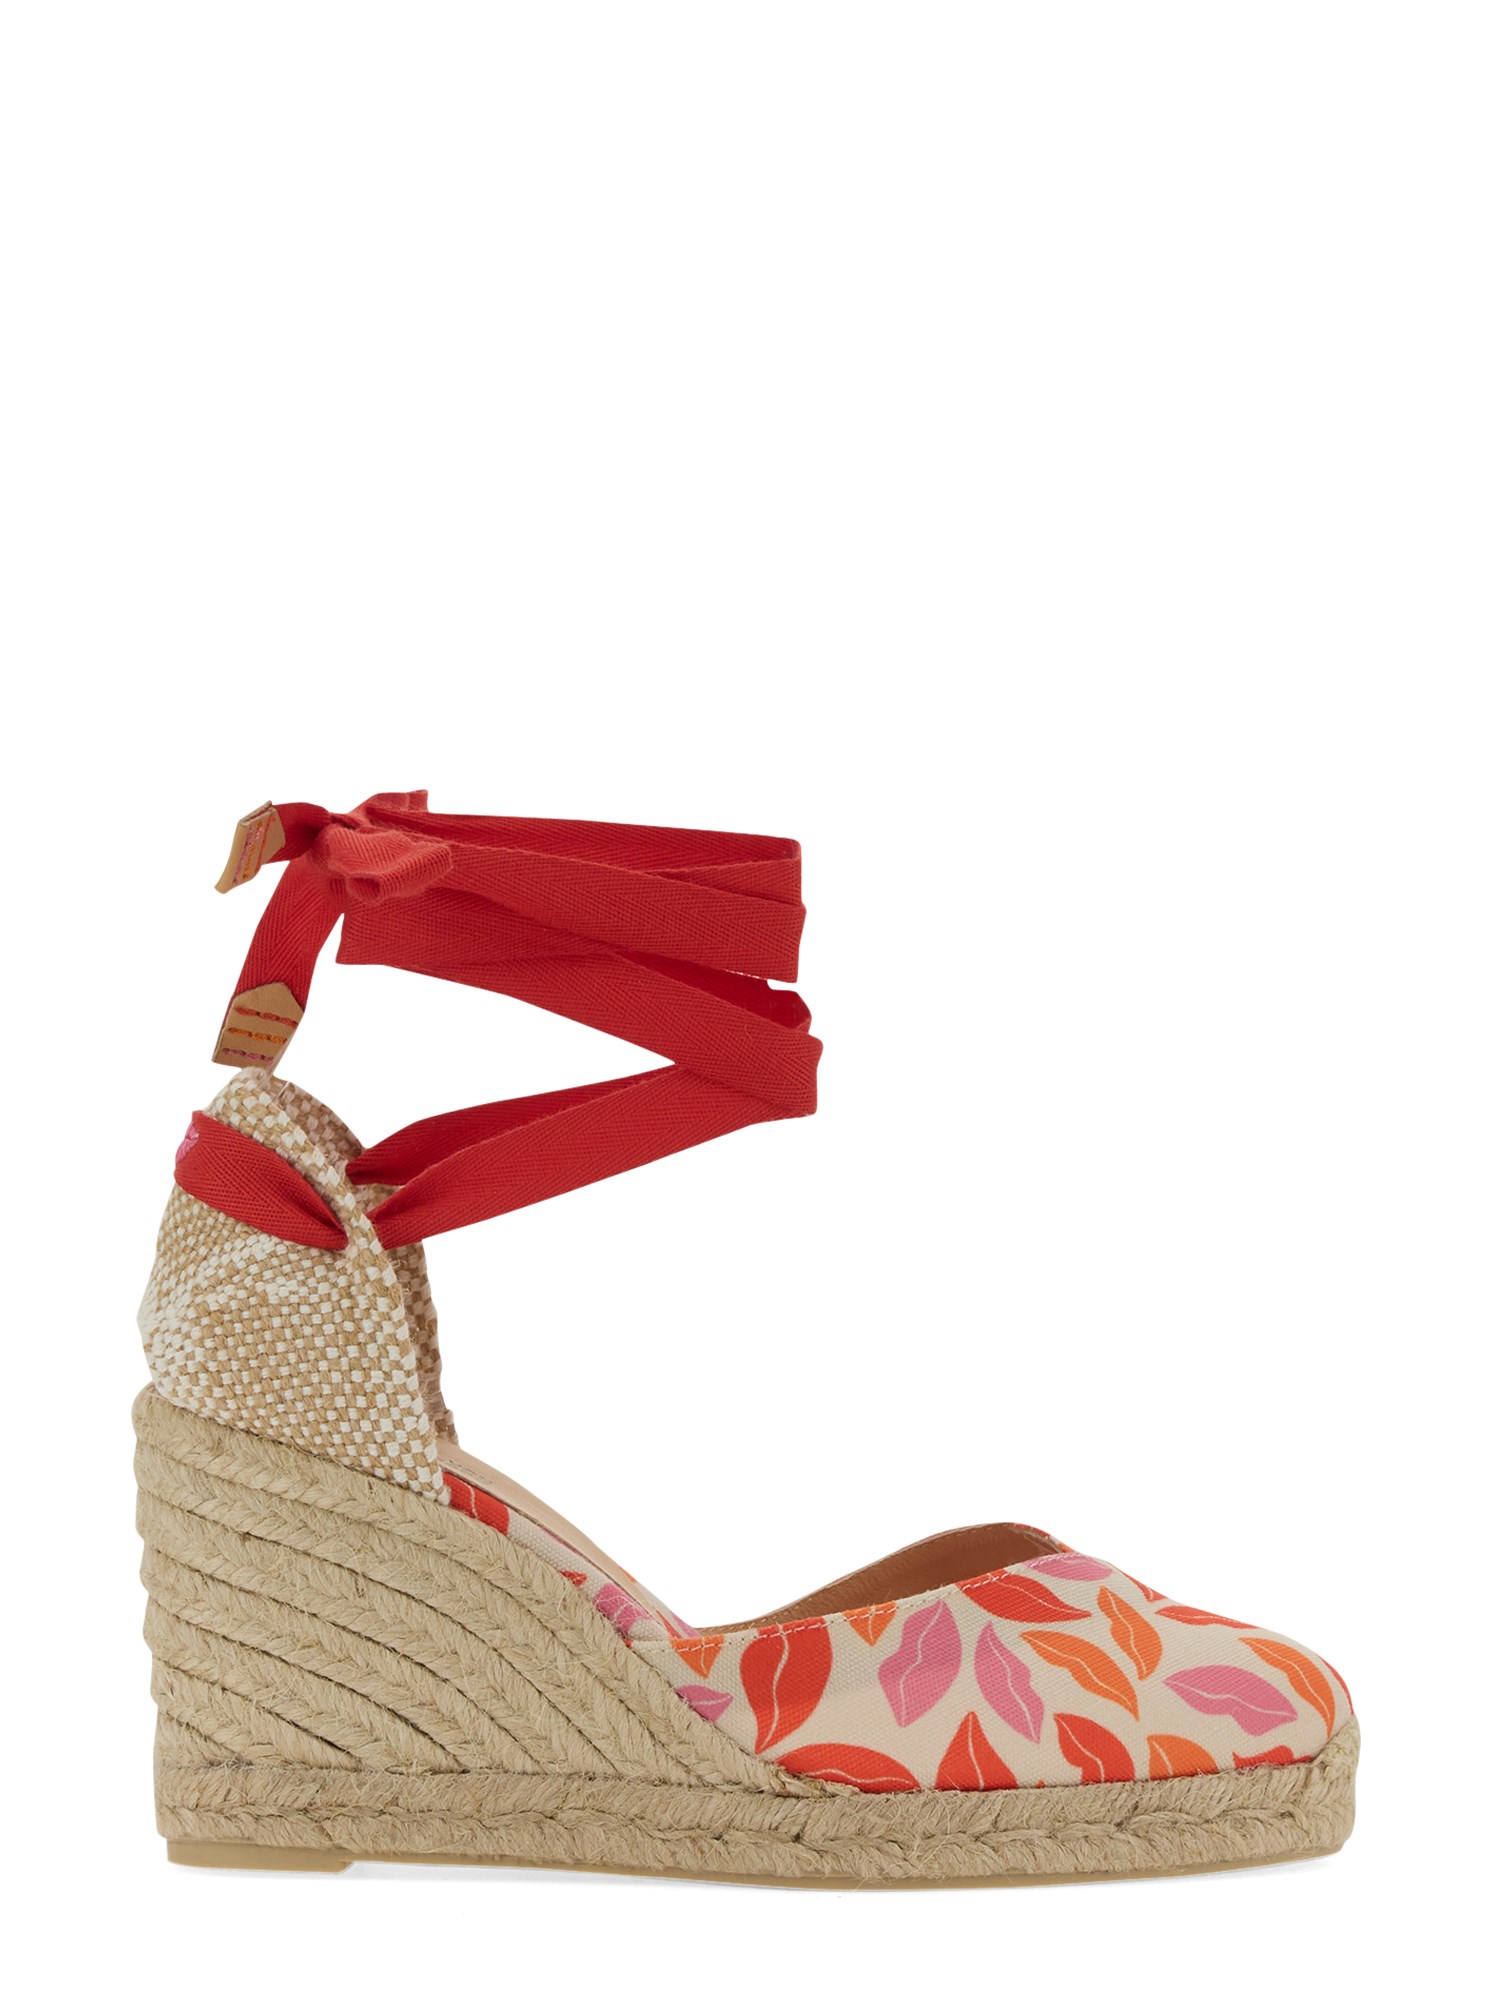 castaner clear espadrille with print